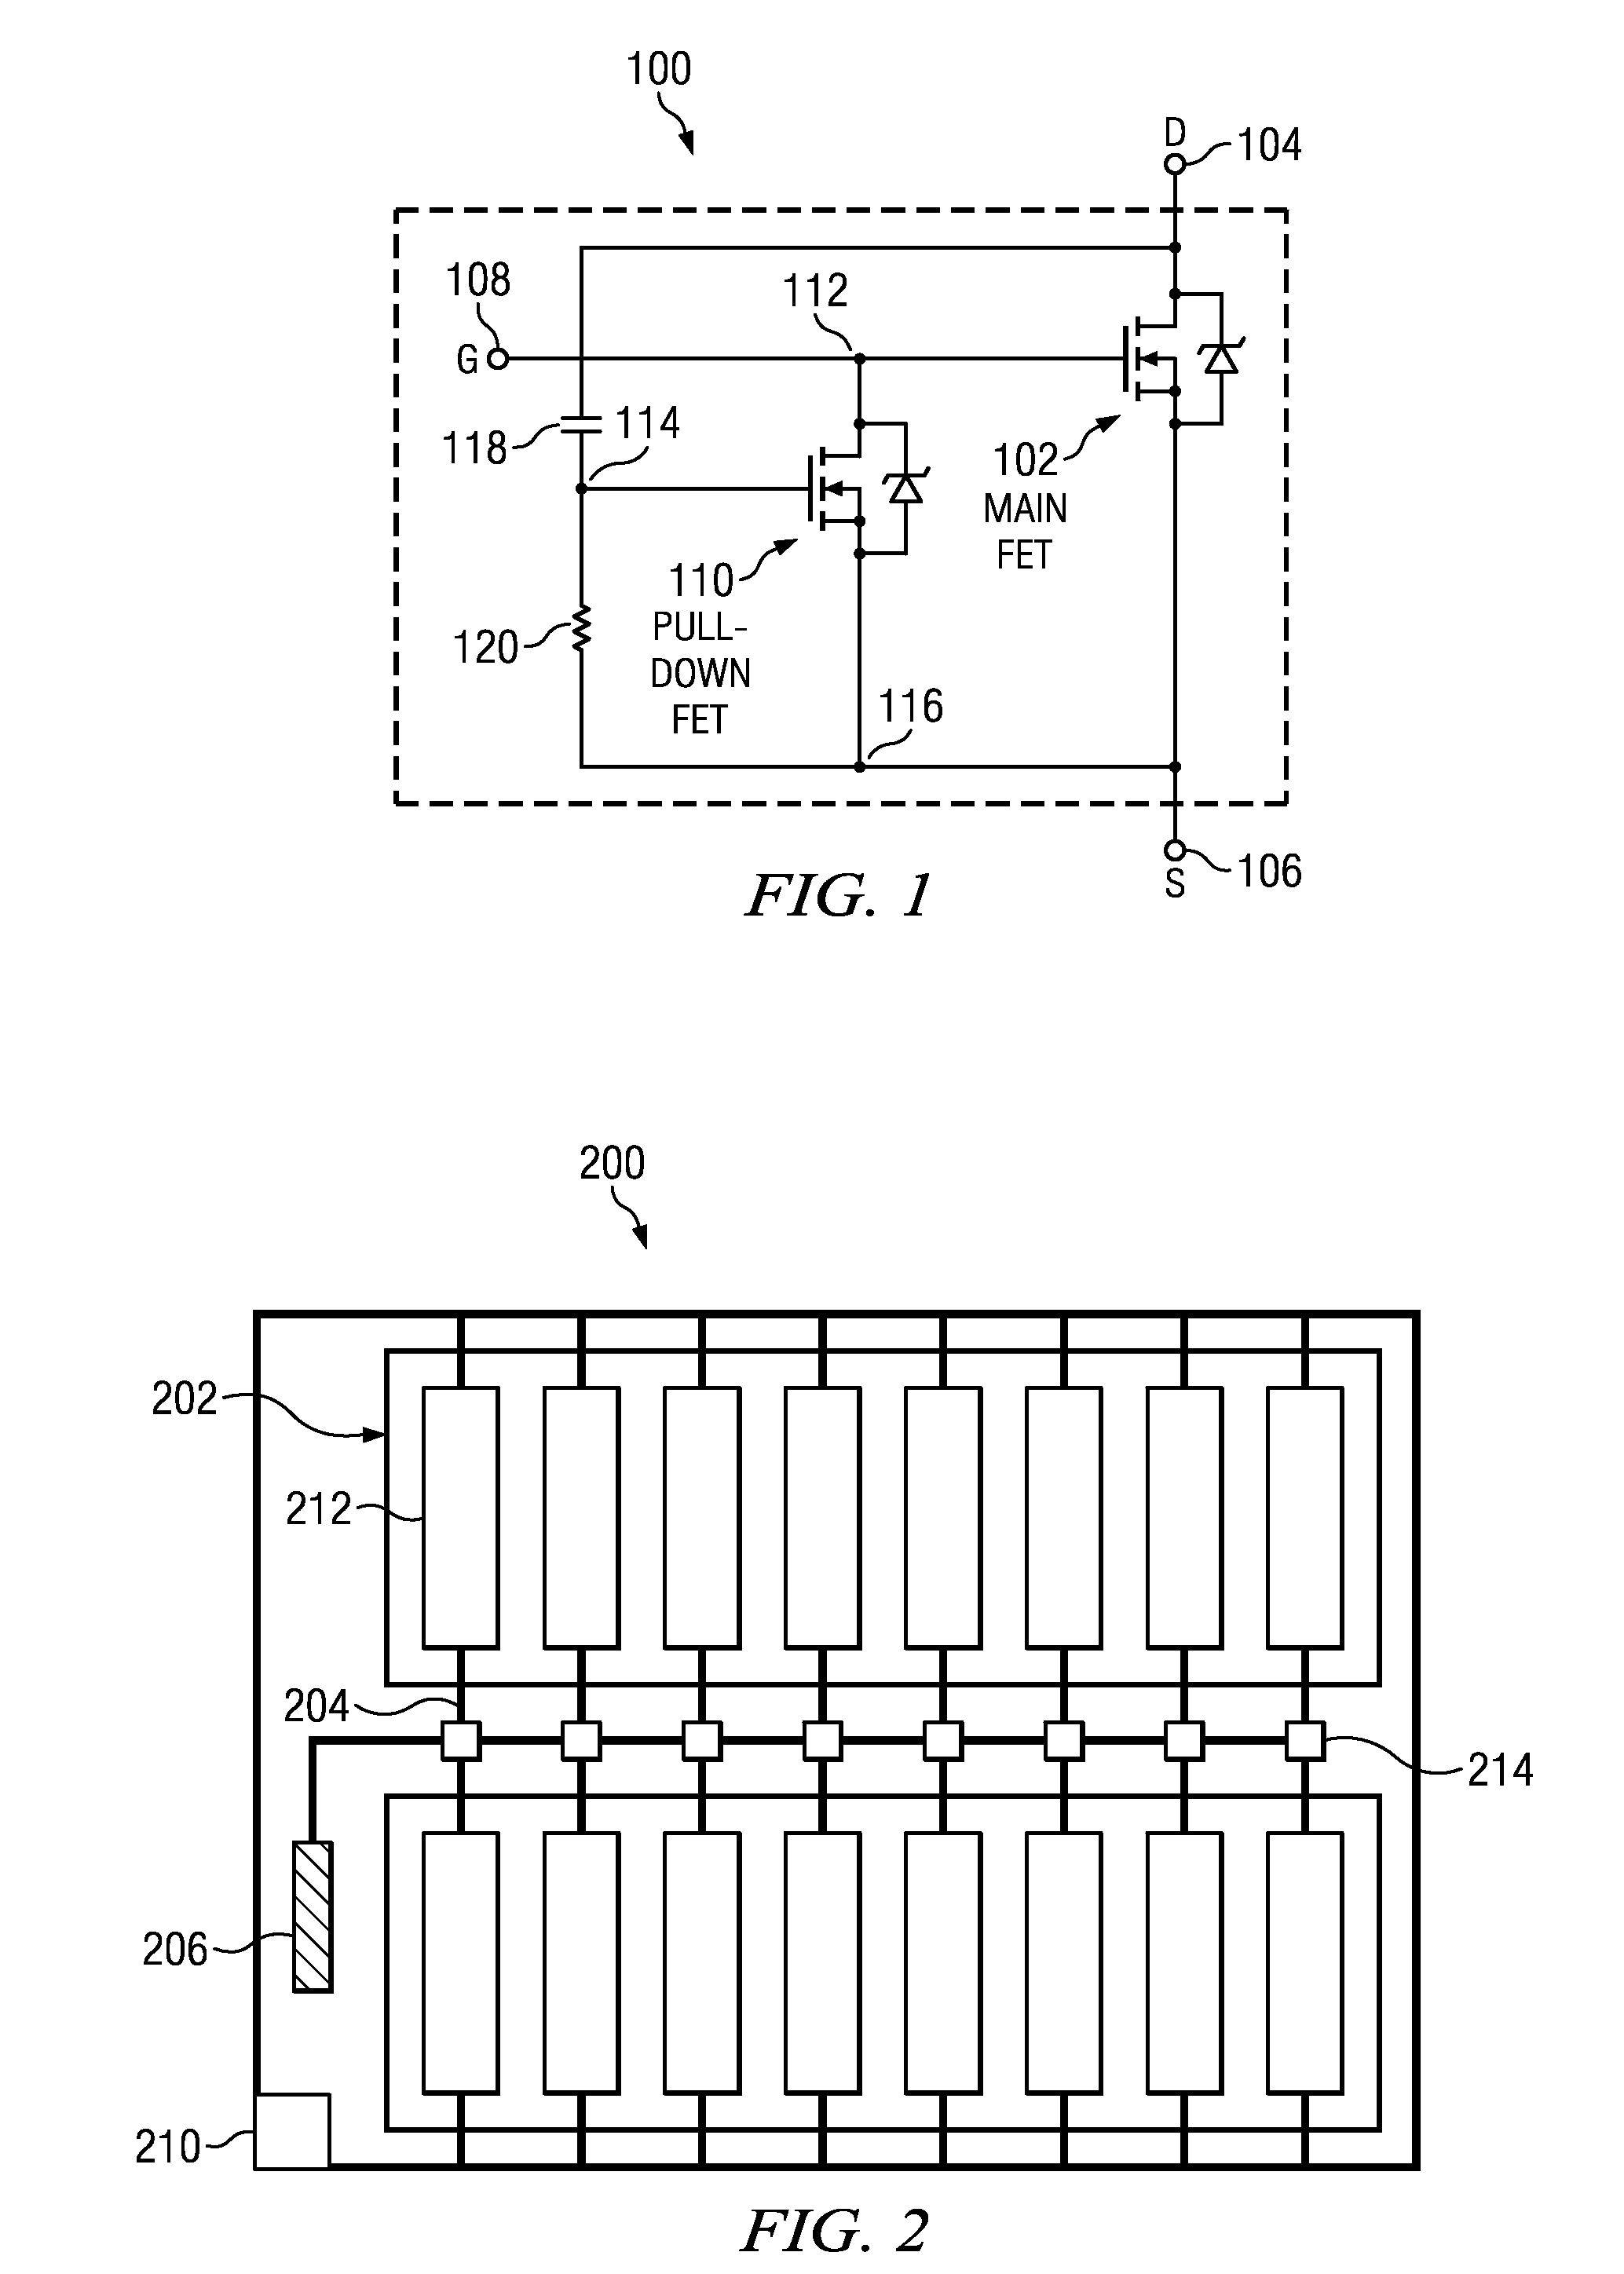 Mosfet with gate pull-down